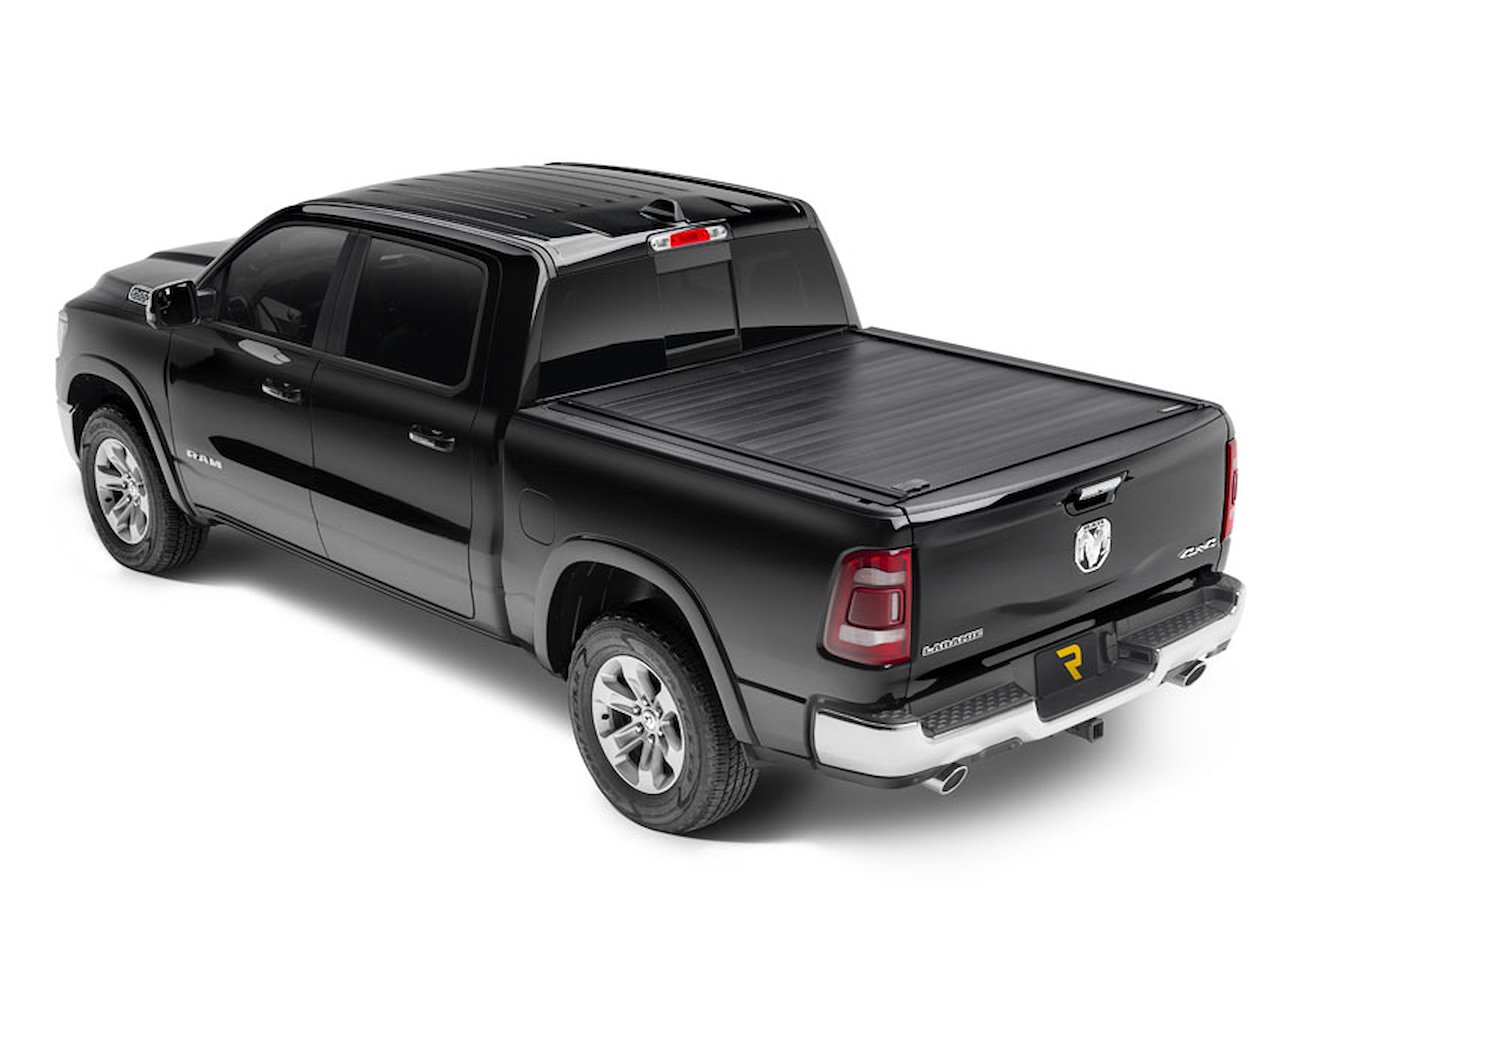 80234 RetraxPRO MX Retractable Tonneau Cover Fits Select Dodge/Ram 5' 7" Bed with RamBox without Stake Pockets